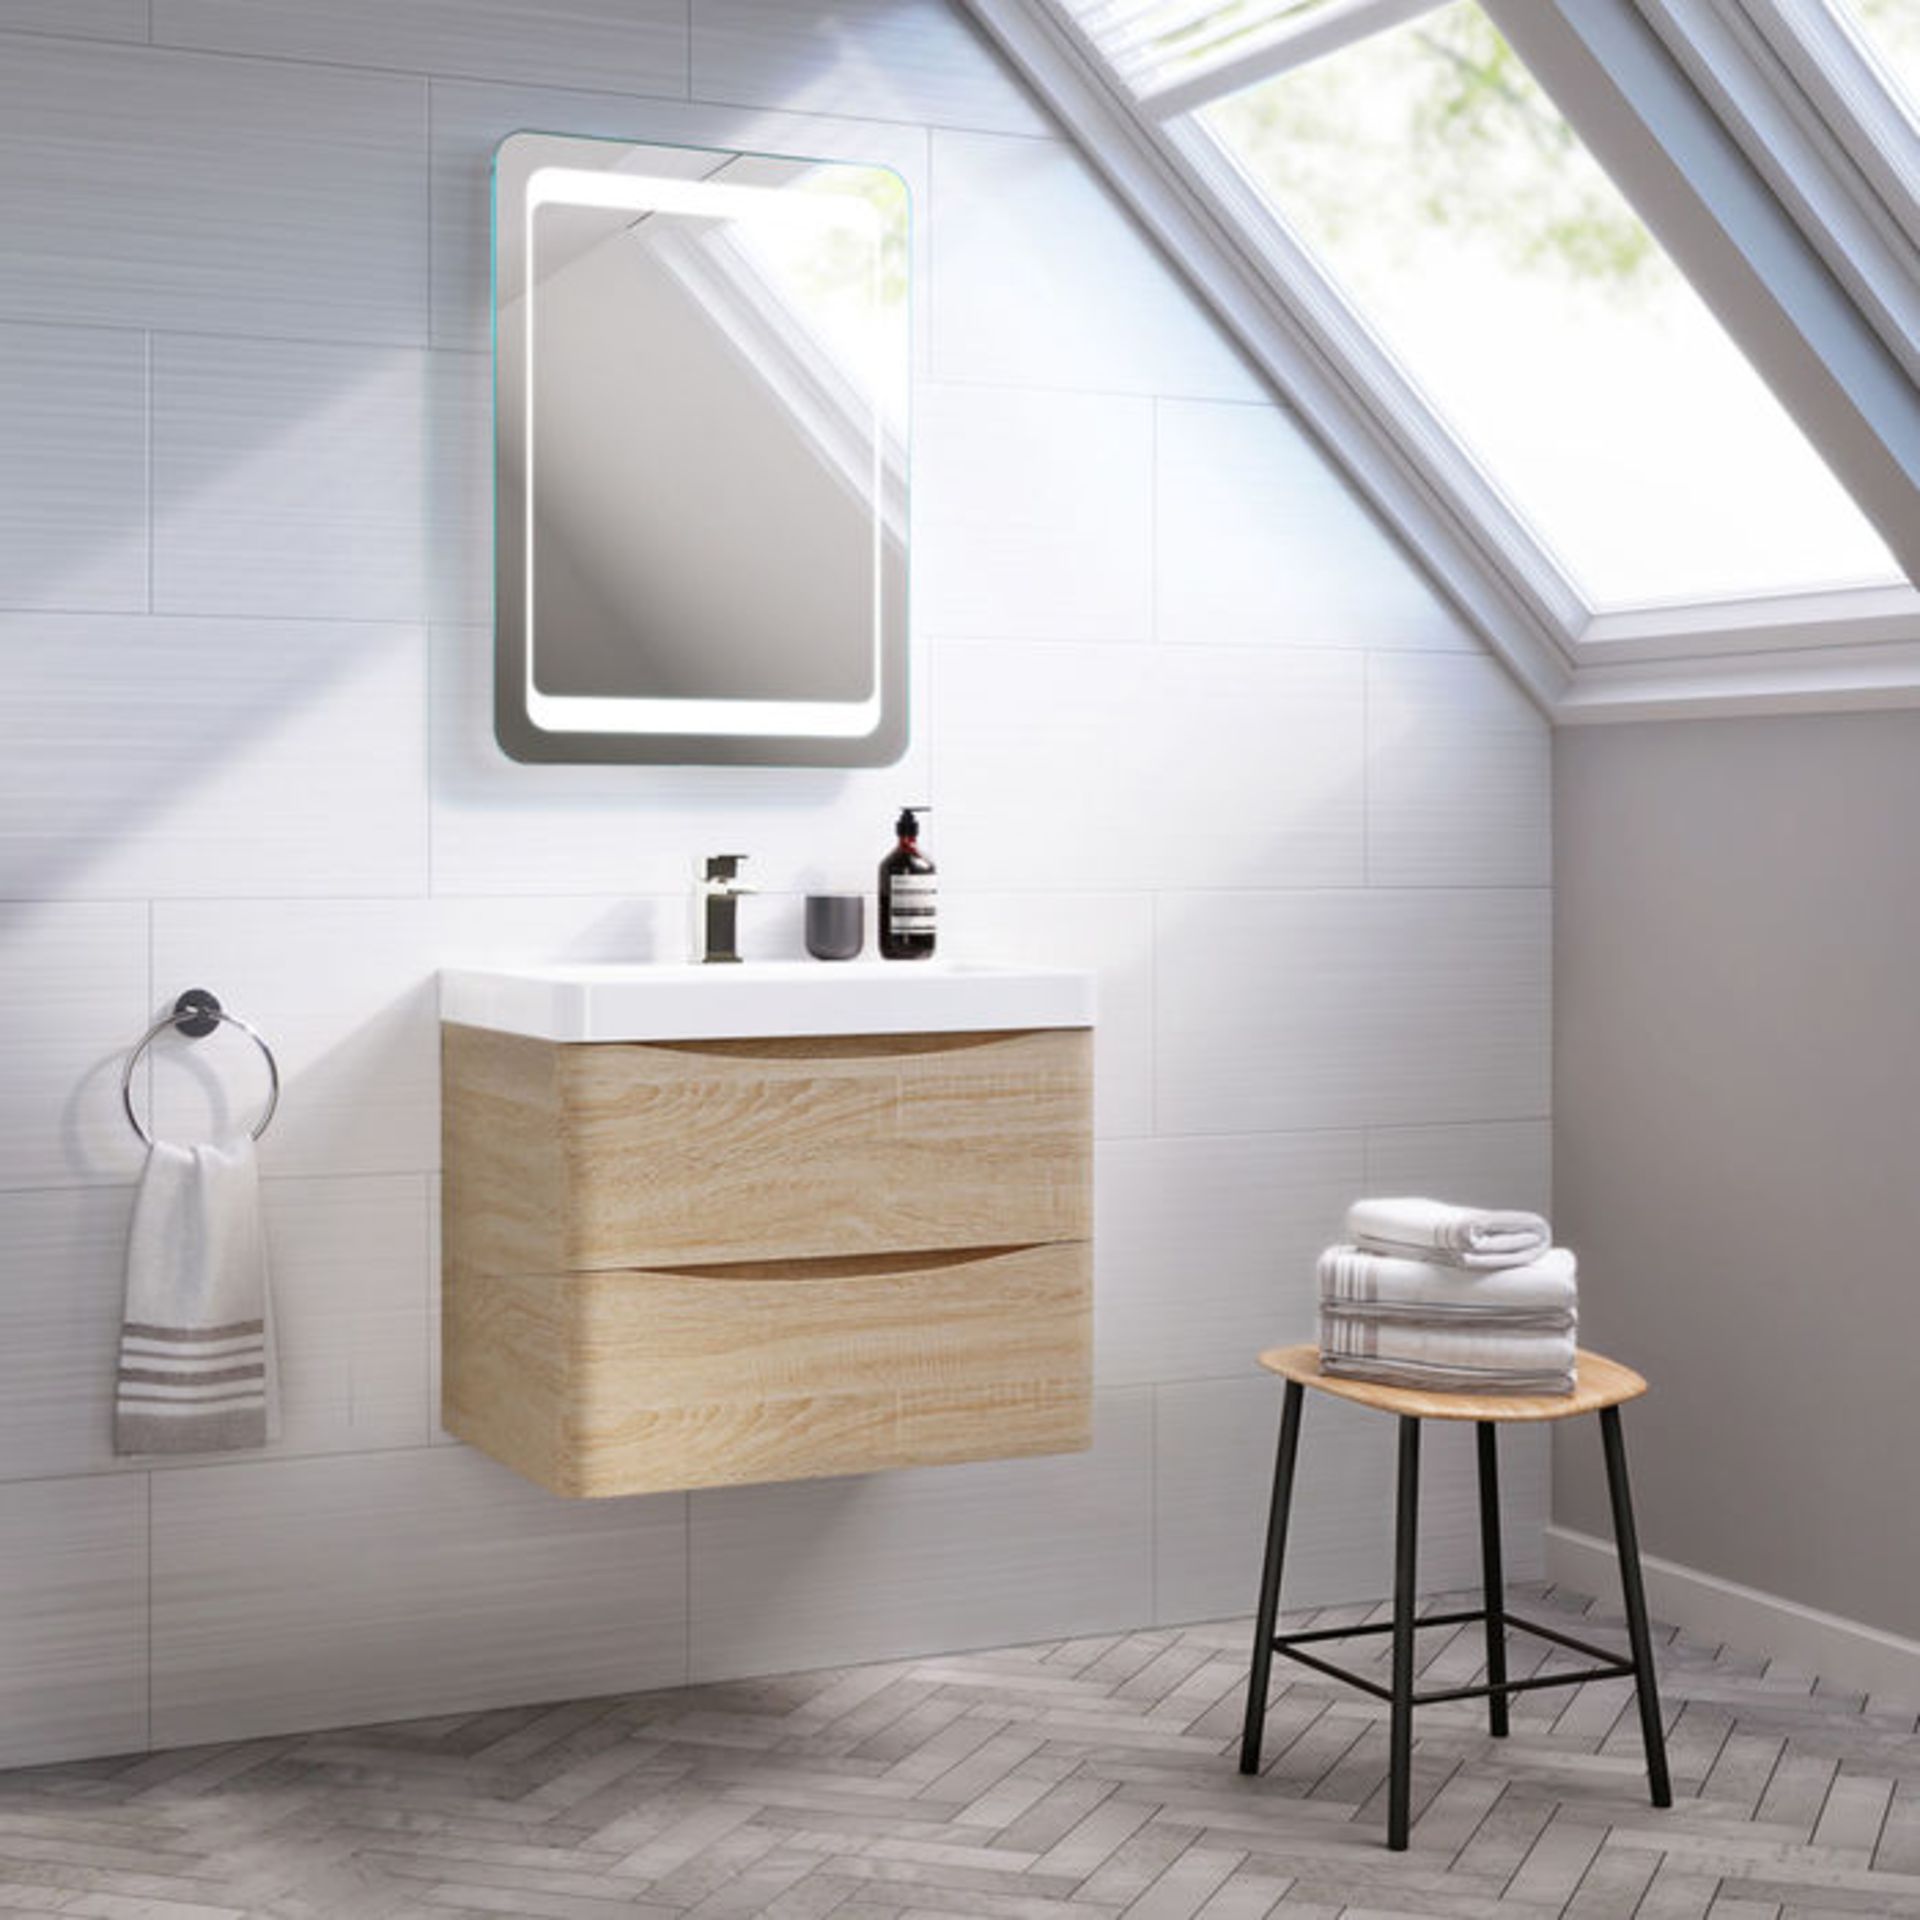 (H166) 700x500mm Quasar Illuminated LED Mirror. RRP £349.99. Energy efficient LED lighting with IP44 - Image 6 of 9